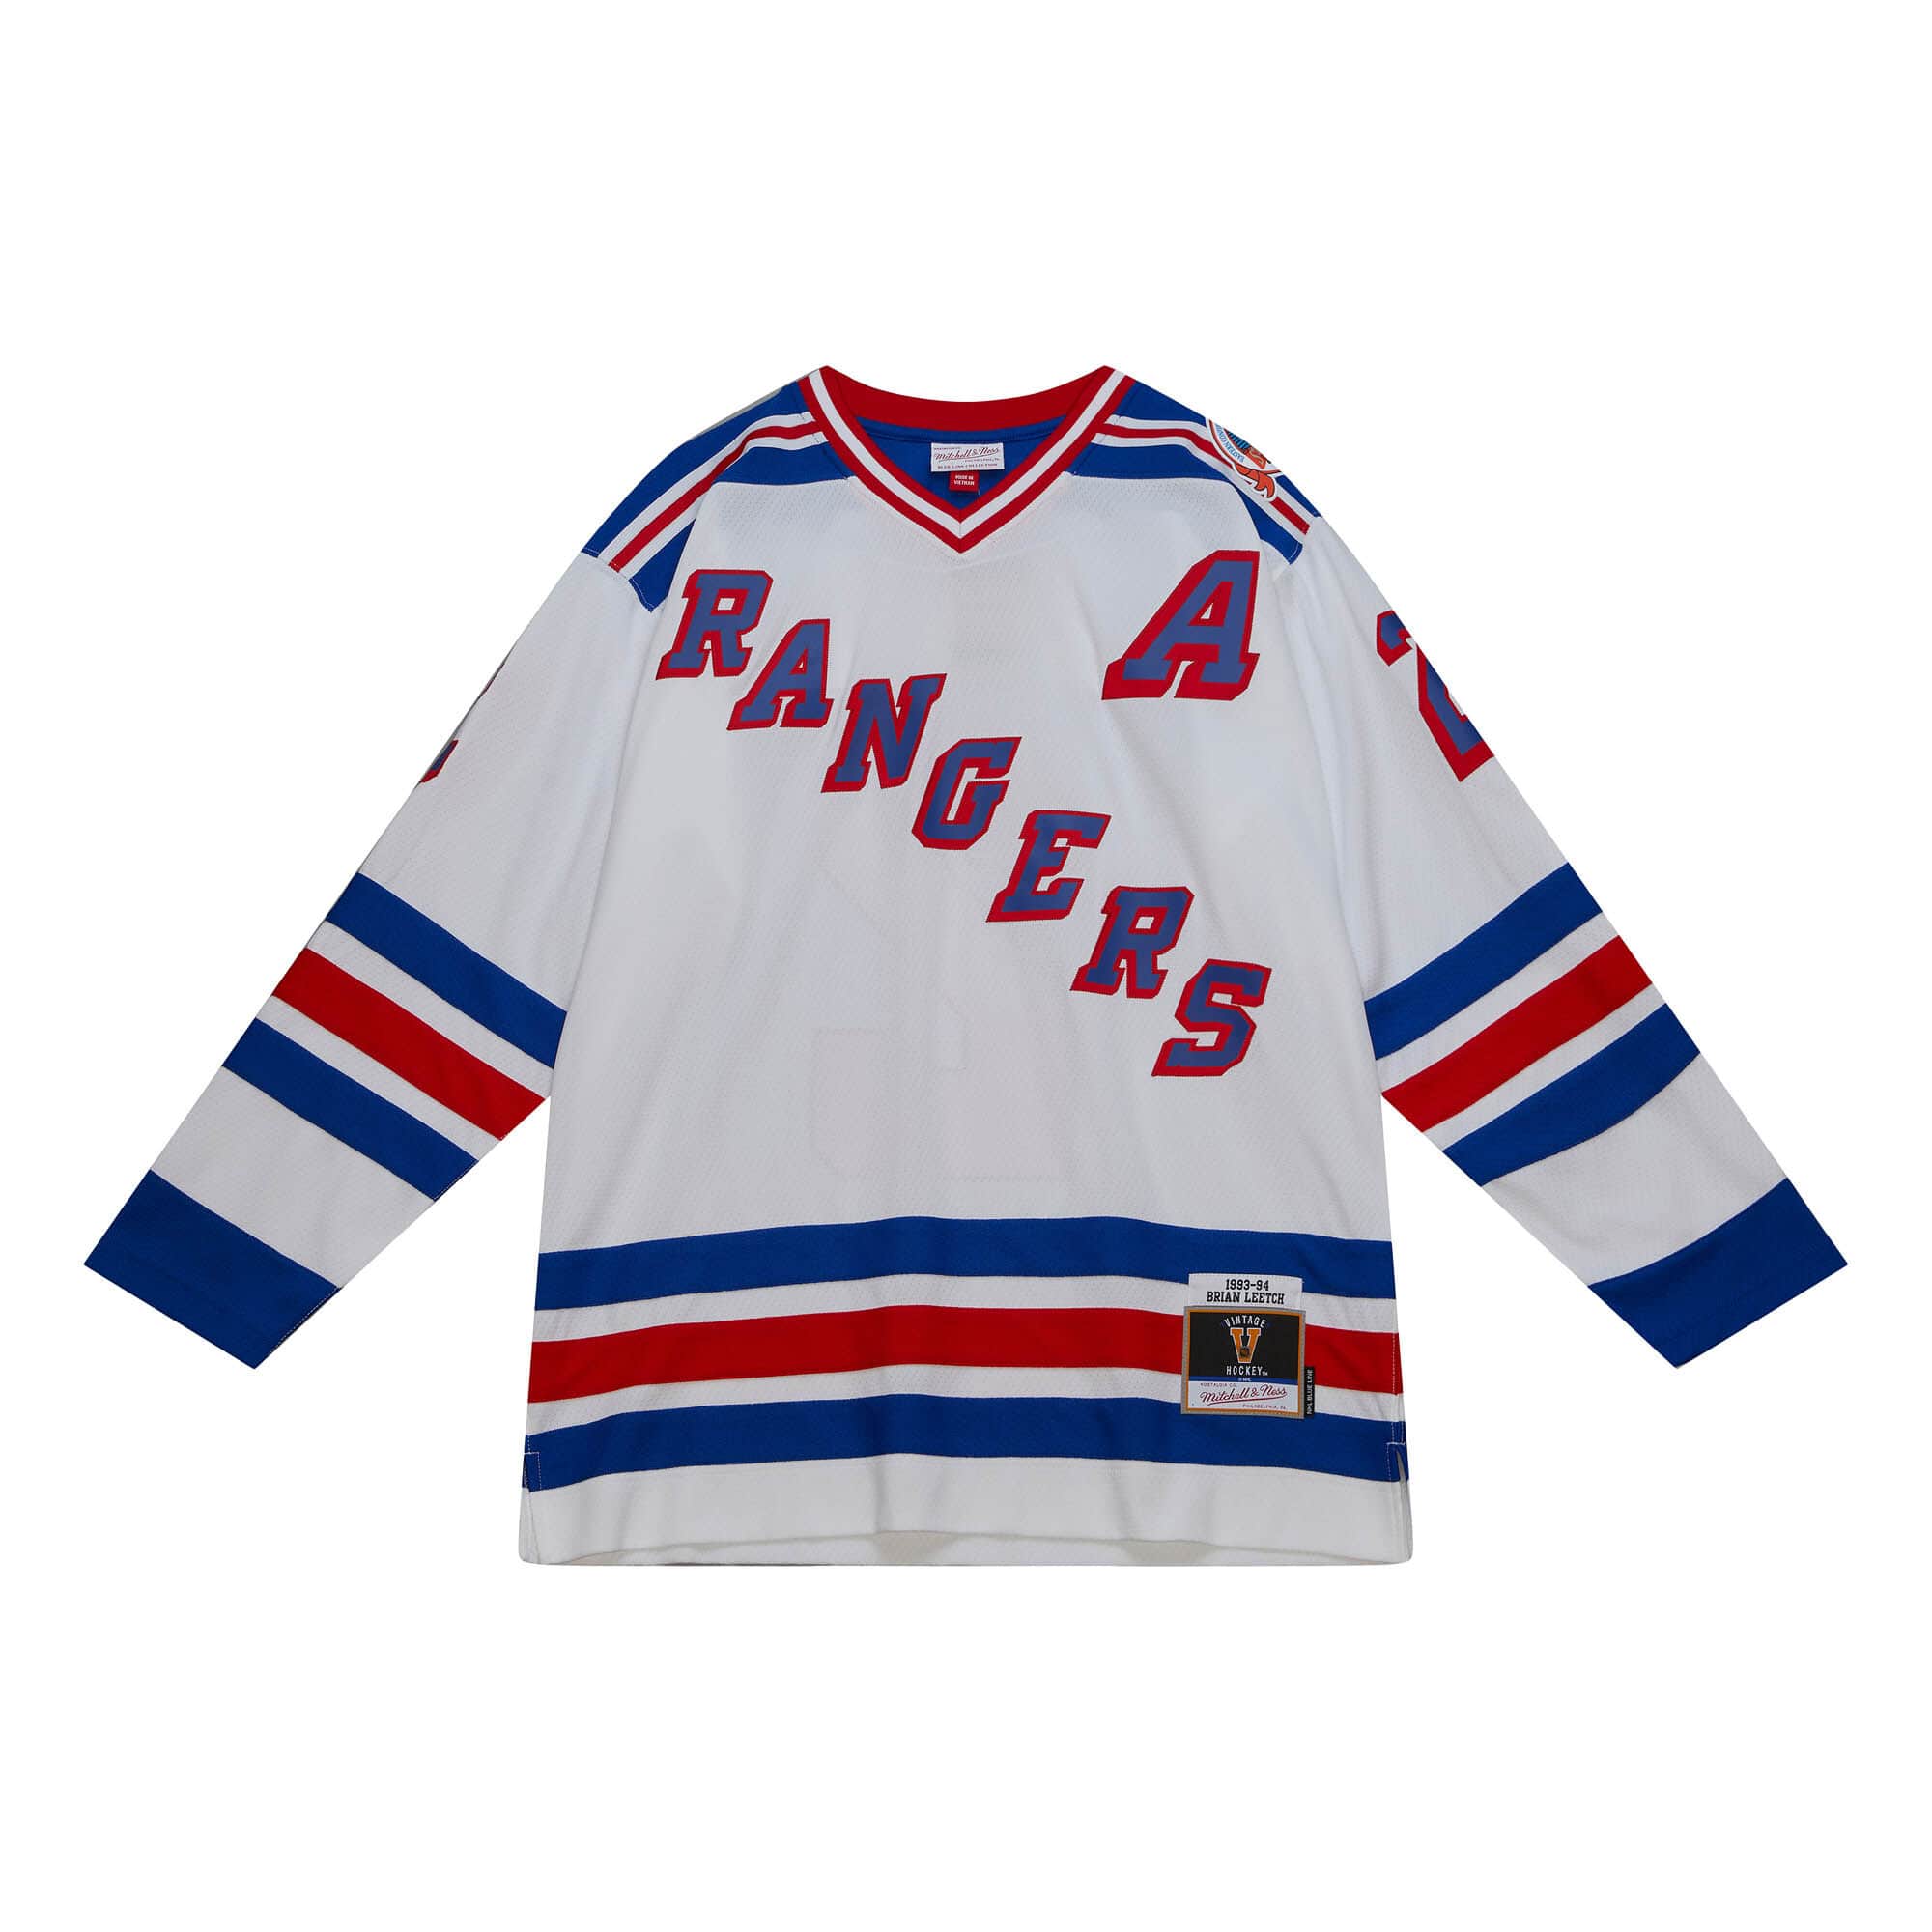 NY Rangers alternate jersey concept. Thoughts? : r/hockey